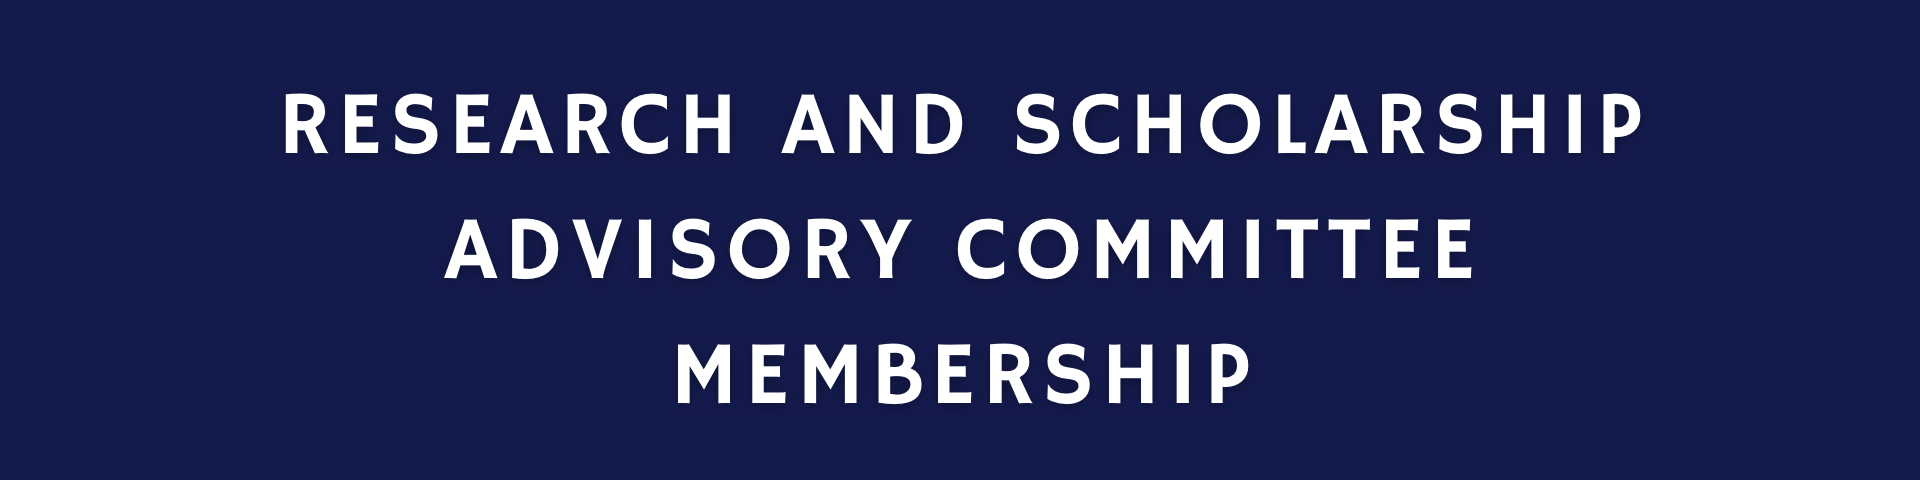 blue banner with white text reading "research and scholarship advisory committee membership"